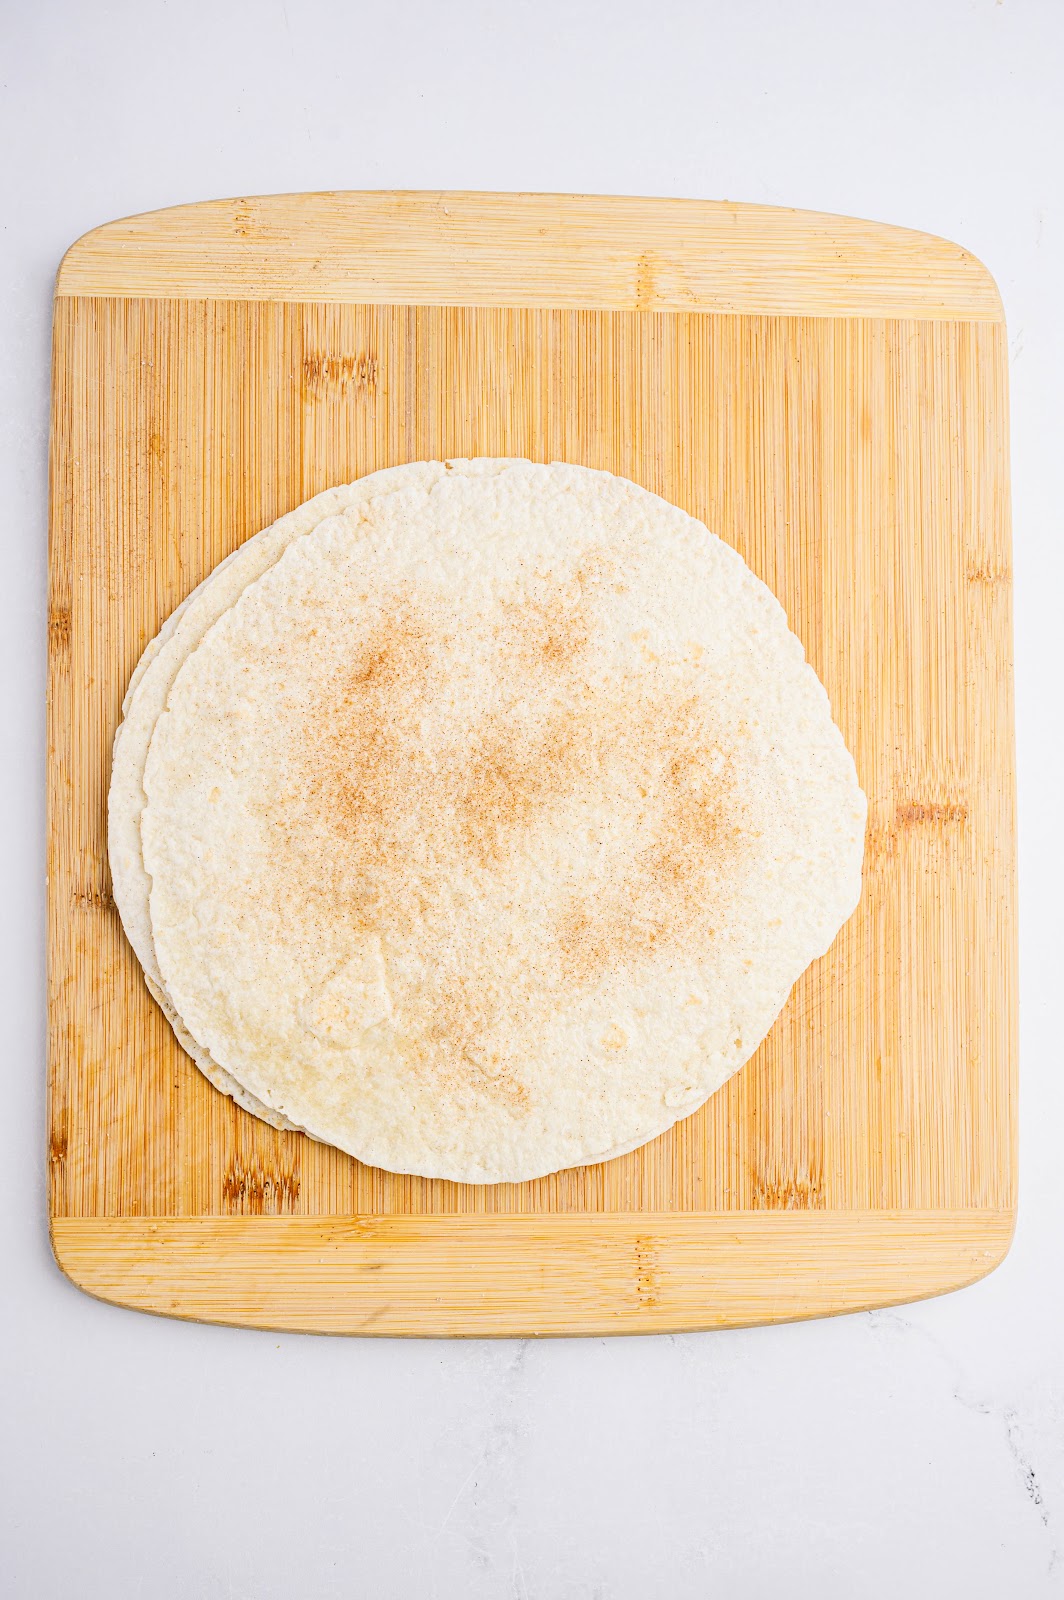 Brush your tortillas with water. Sprinkle the cinnamon sugar evenly over both sides of your tortillas.
